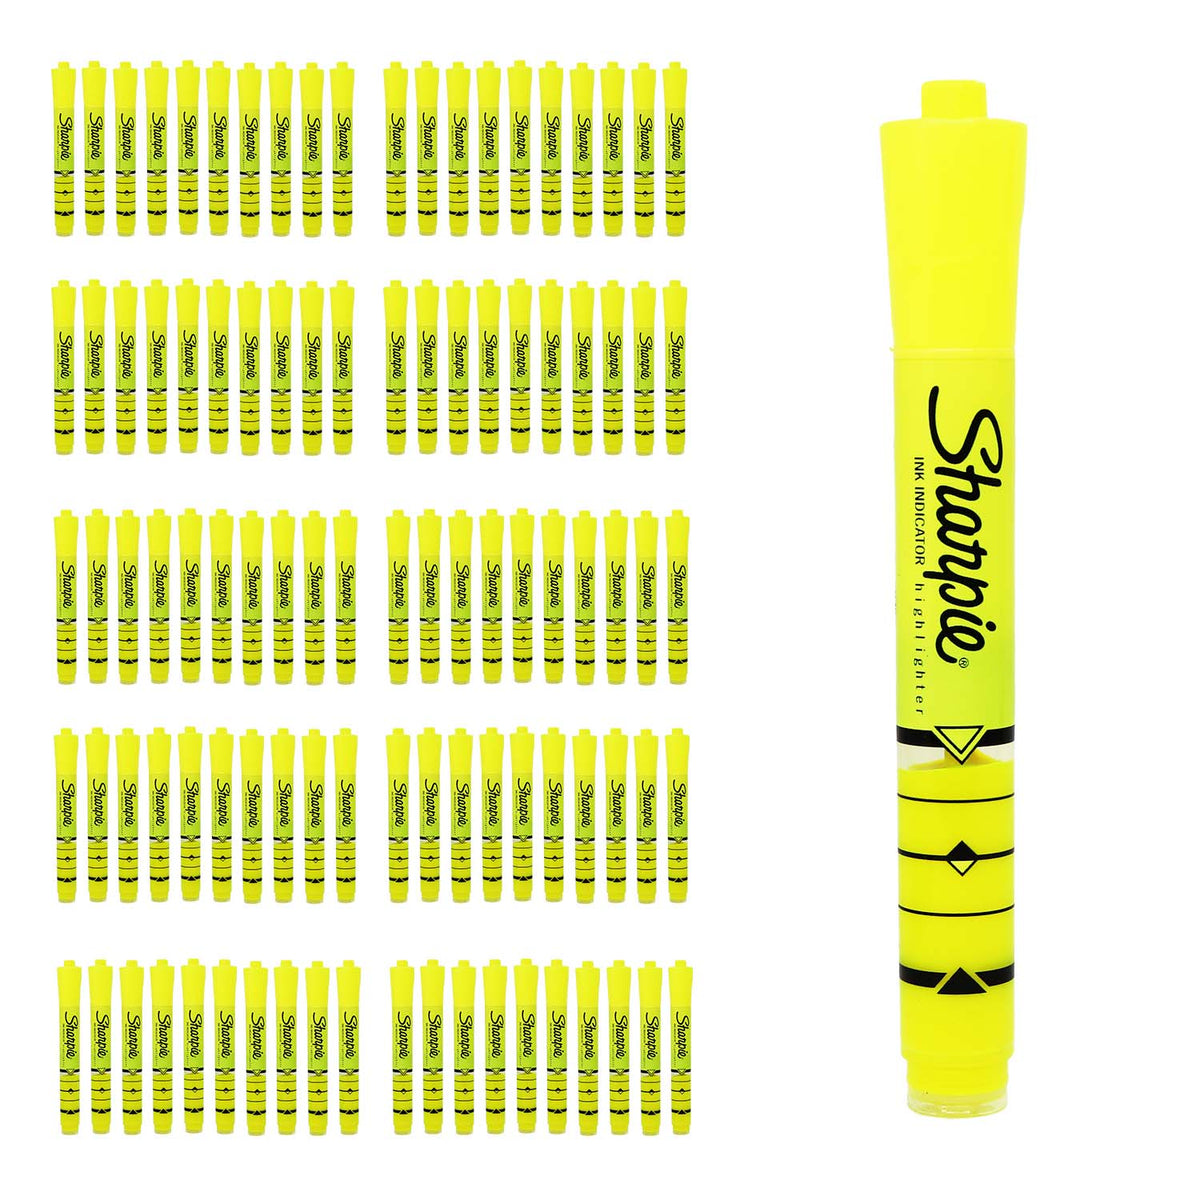 Buy 100 Ink Indicator Highlighters in Yellow - Bulk School Supplies Wholesale Case of 100 -Ink Indicator Highlighters